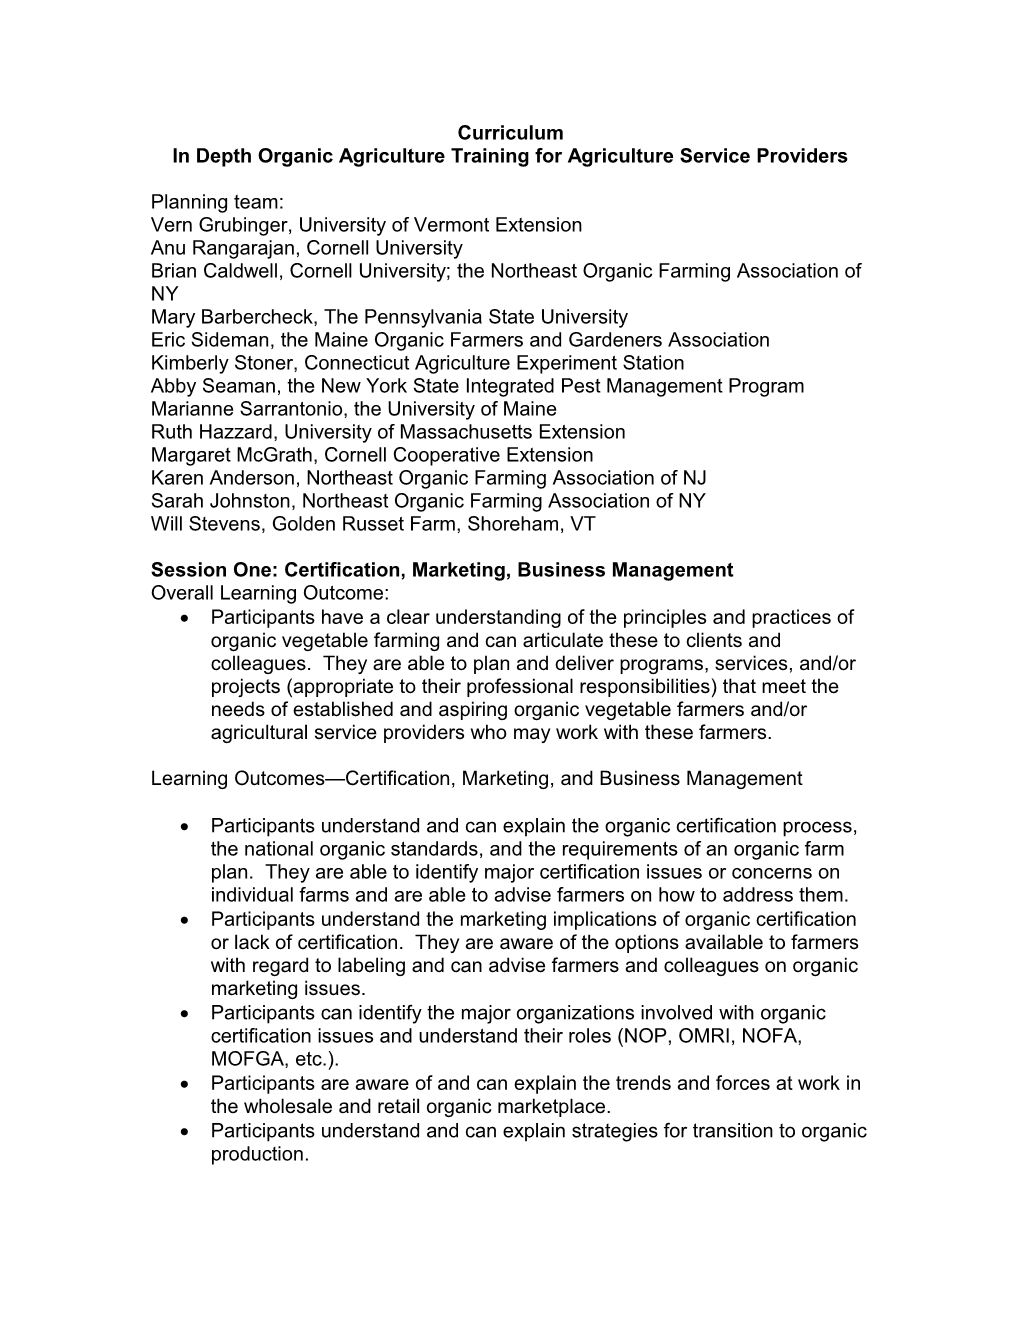 In Depth Organic Agriculture Training for Agriculture Service Providers